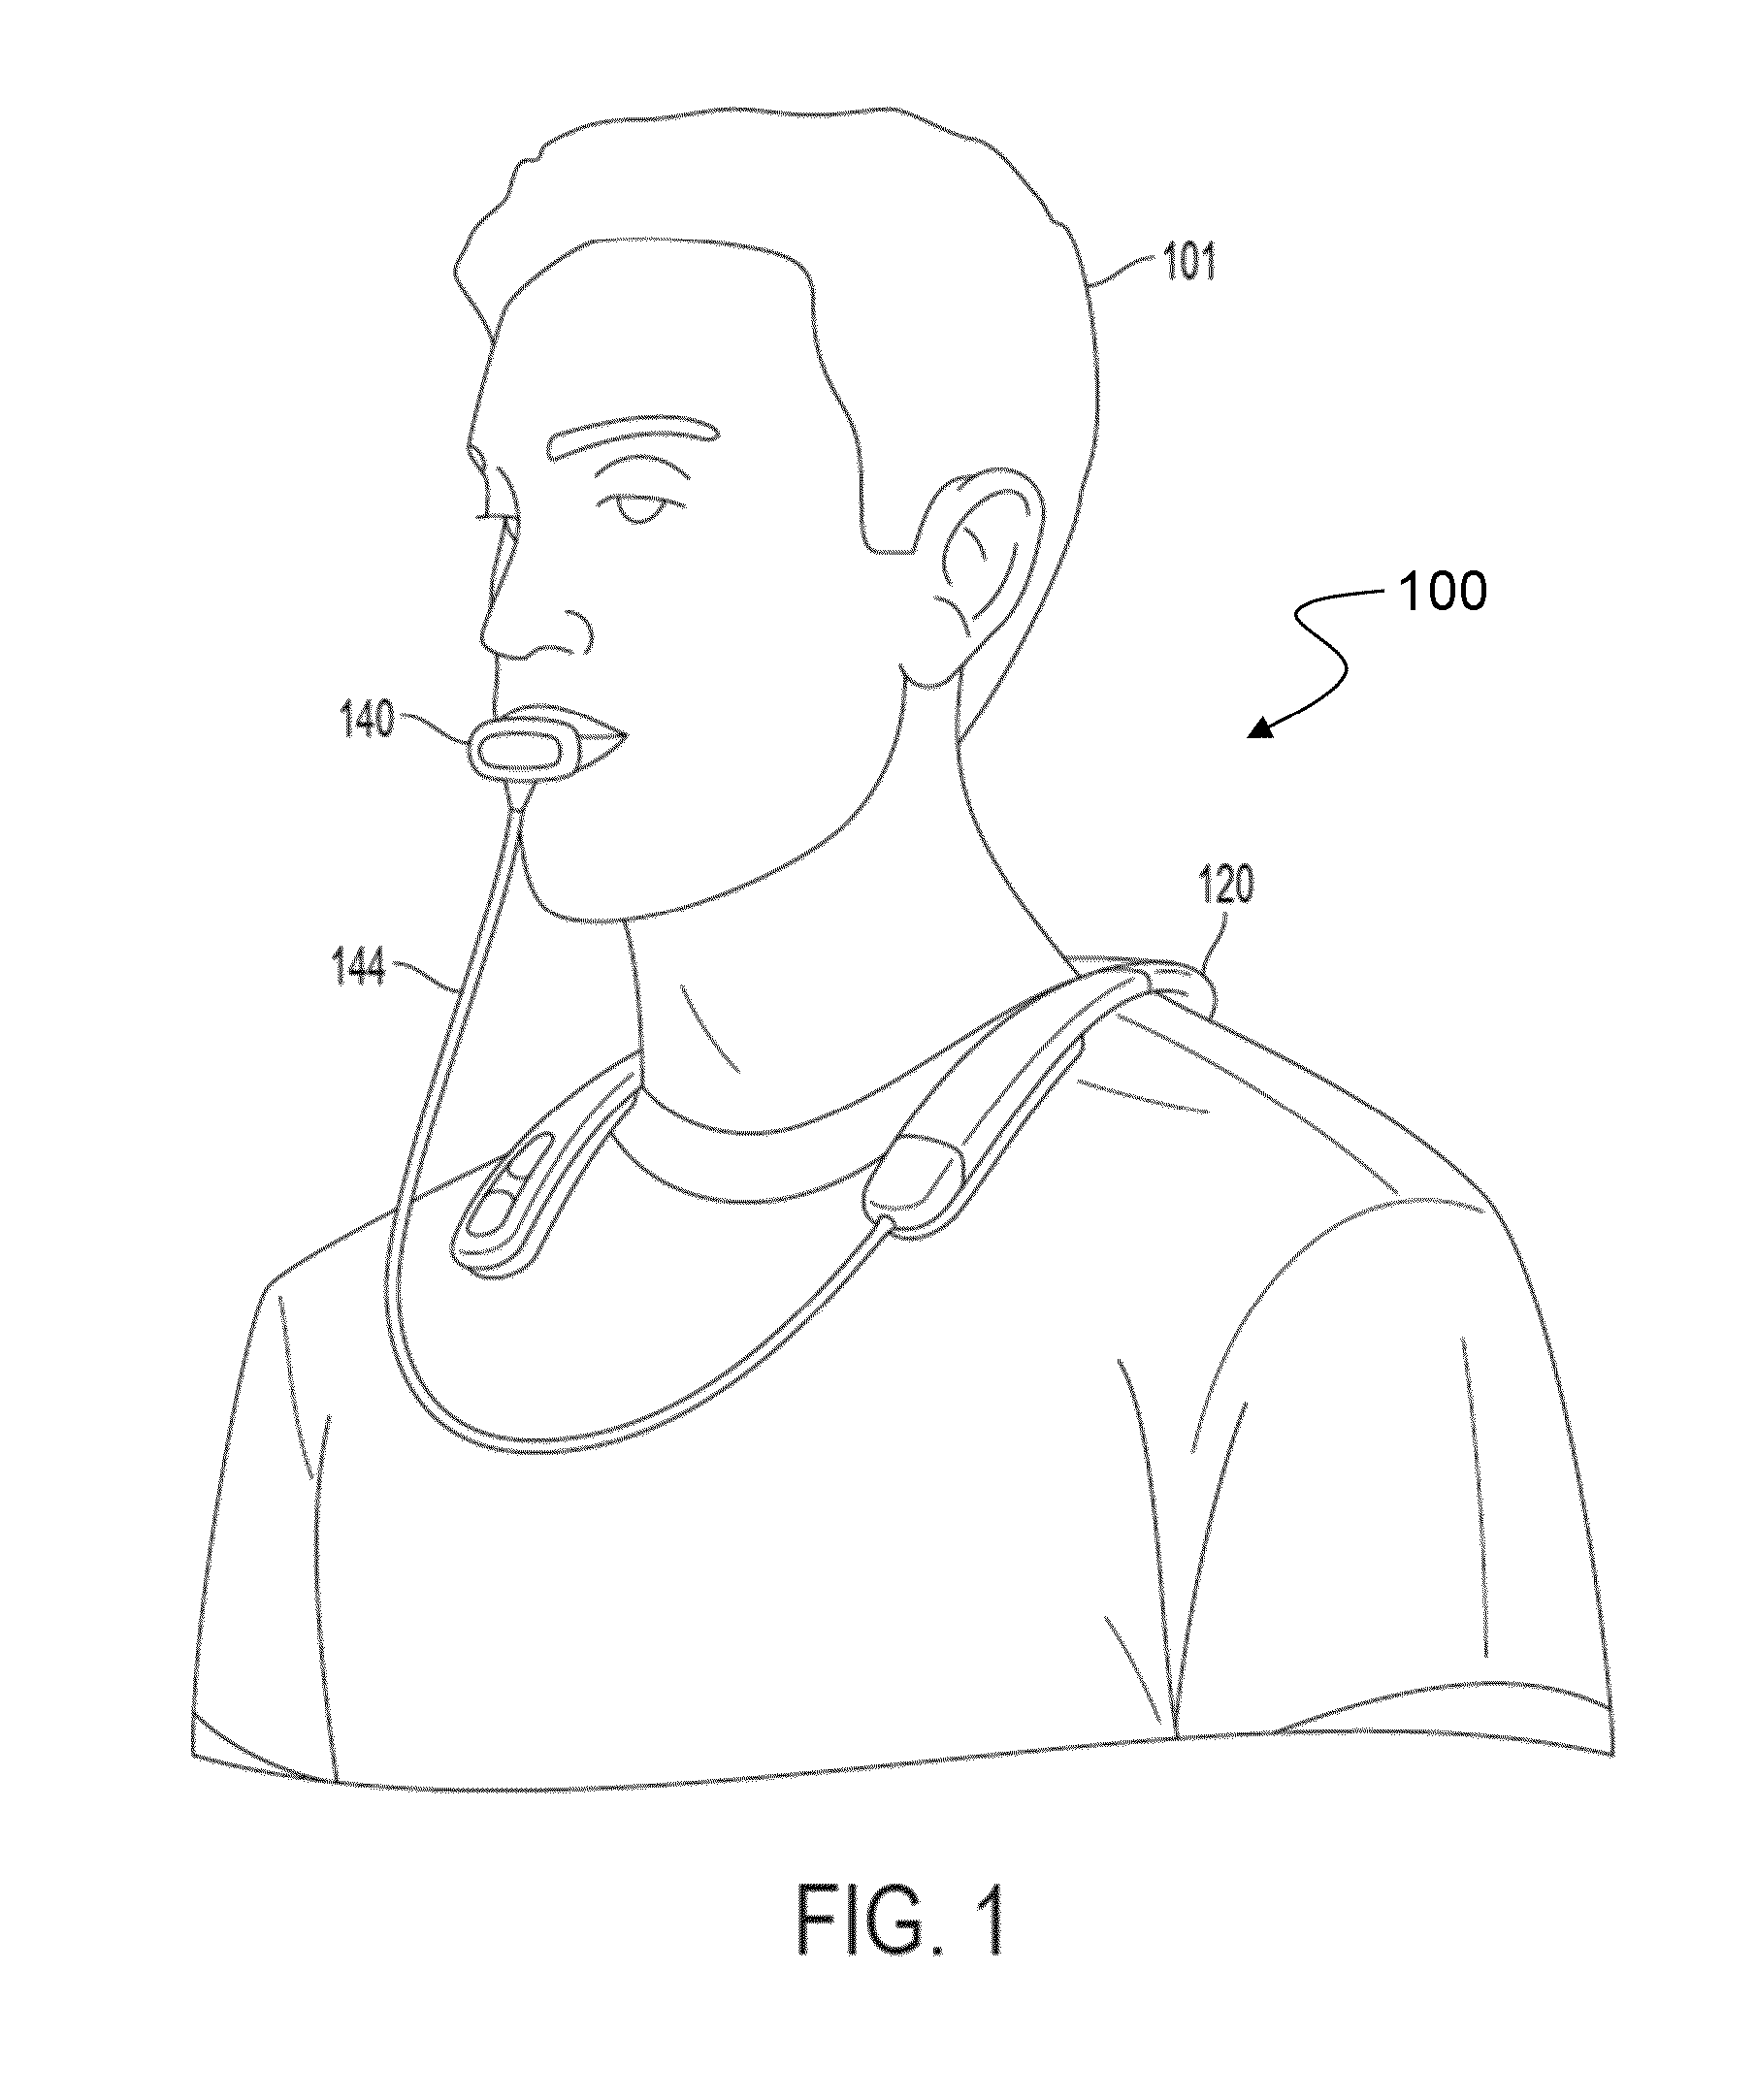 Methods of Manufacturing Devices for the Neurorehabilitation of a Patient